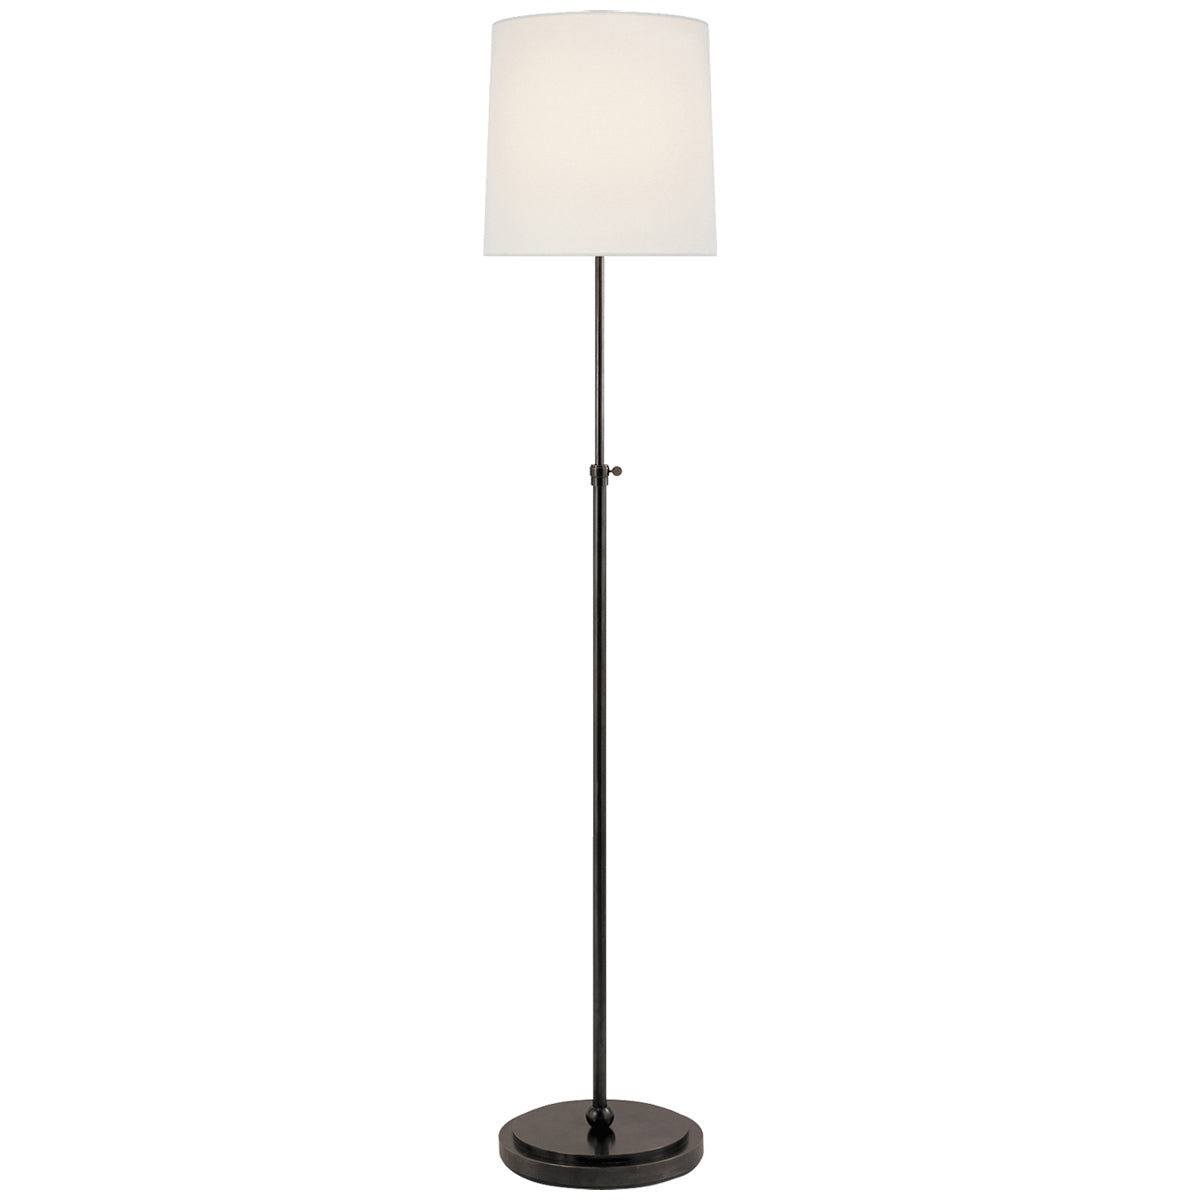 Visual Comfort Bryant Floor Lamp with Linen Shade